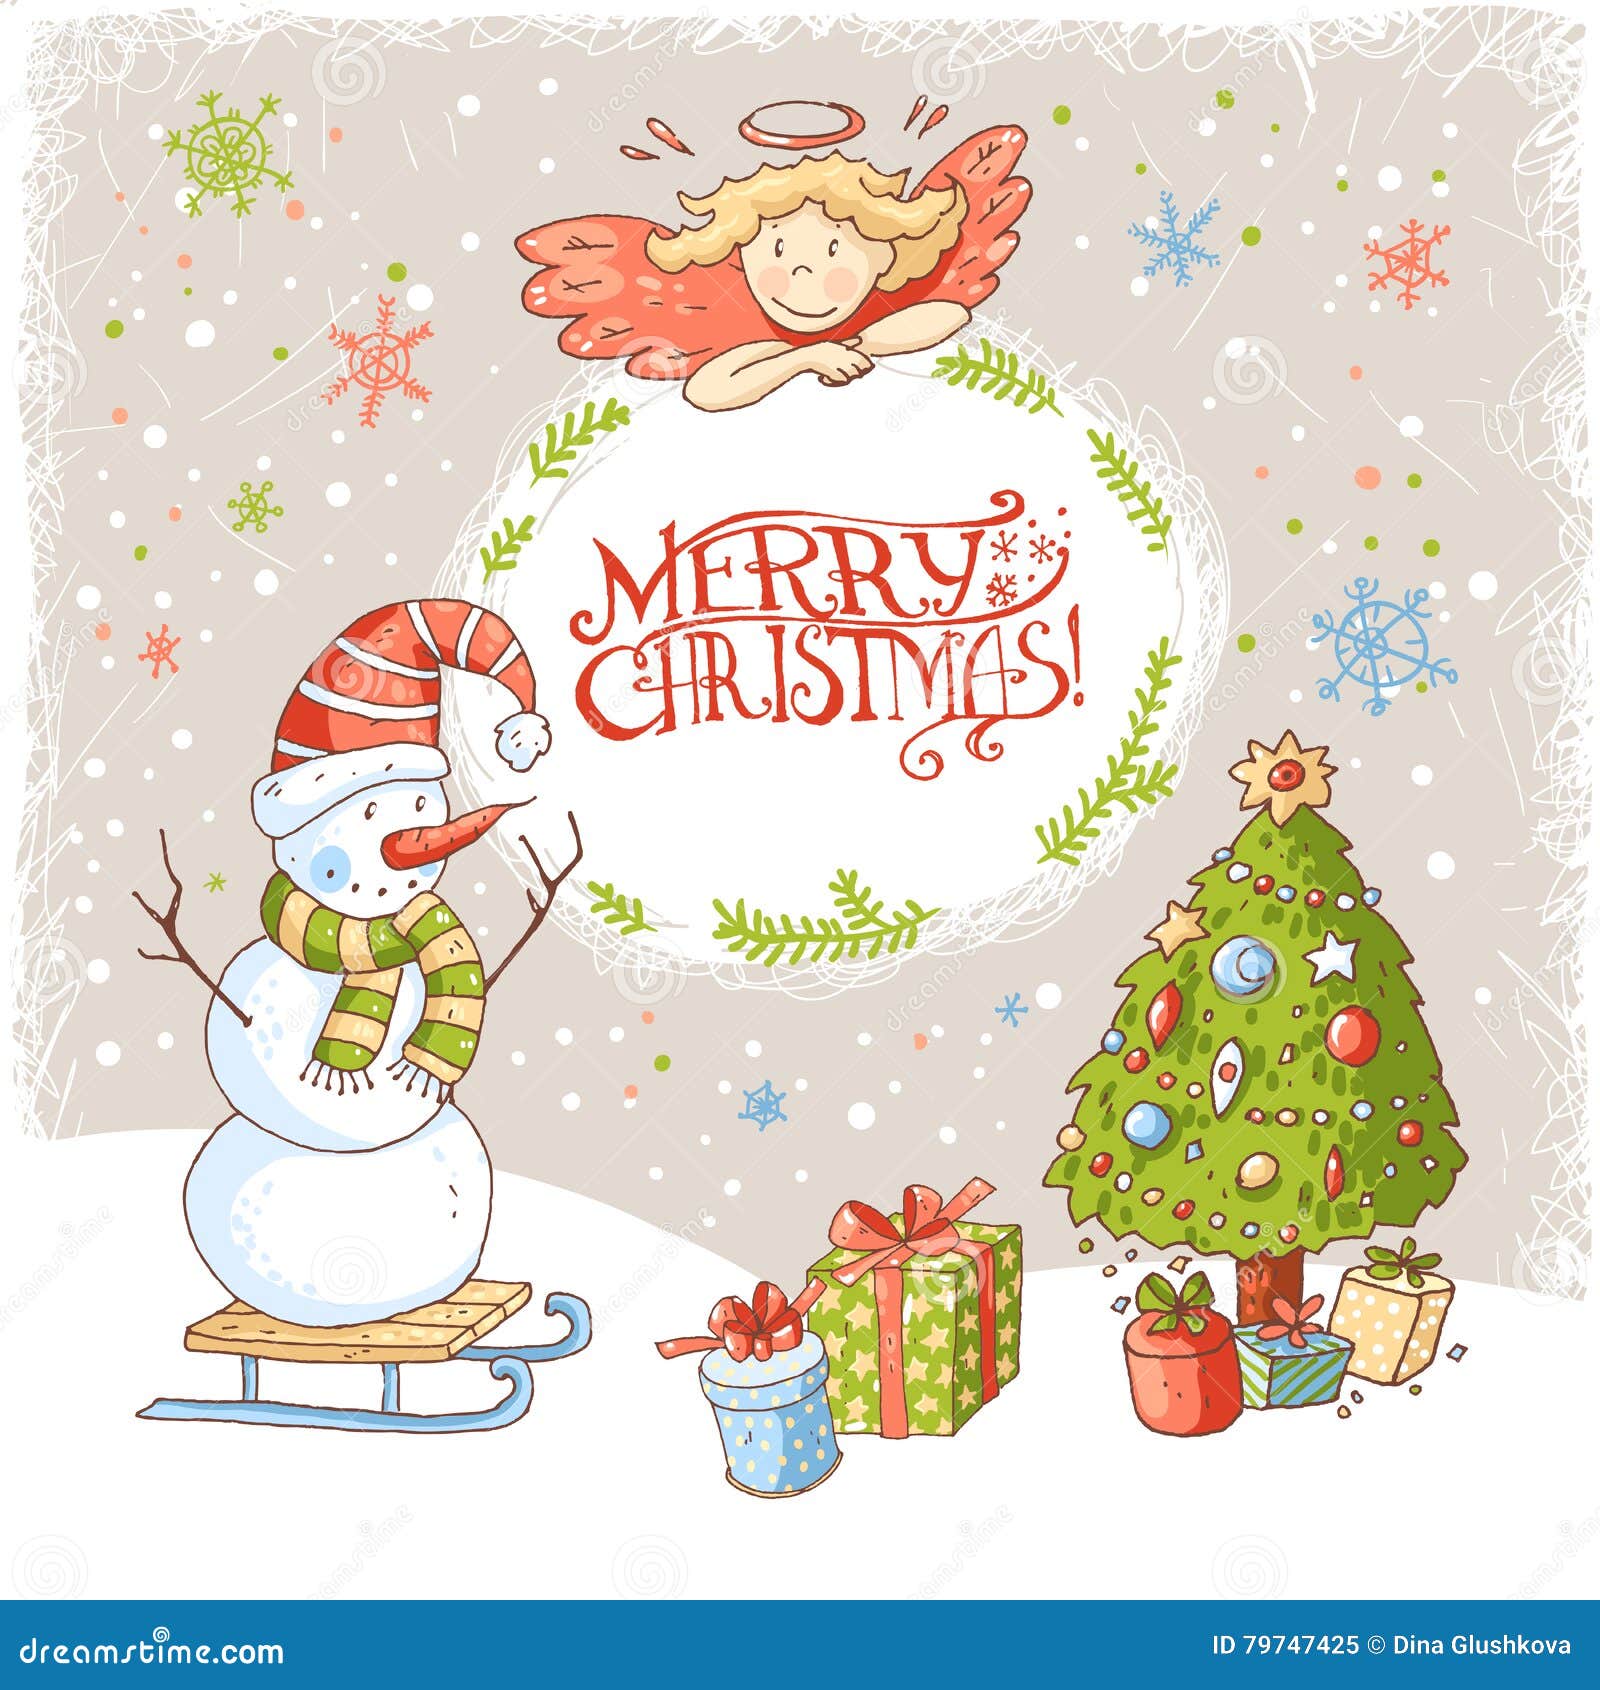 Vector Christmas and New Year greeting card with the text